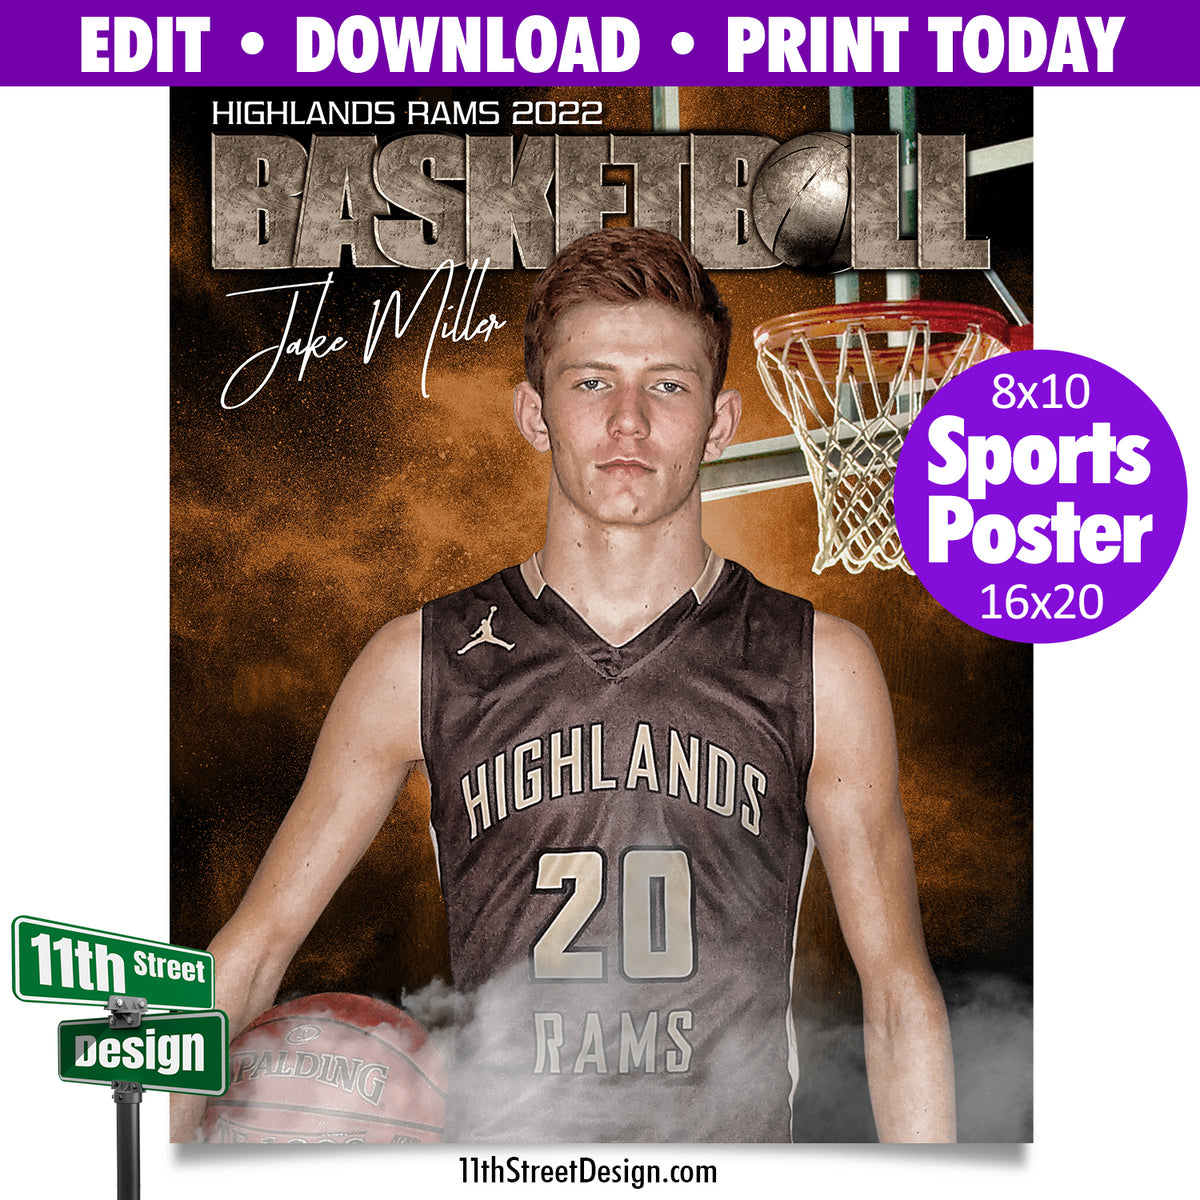 Sports Poster • Edit Now Online • Print Today • Digital Download • Custom Sports Photos • Senior Day Night Poster • Rocked Basketball Template